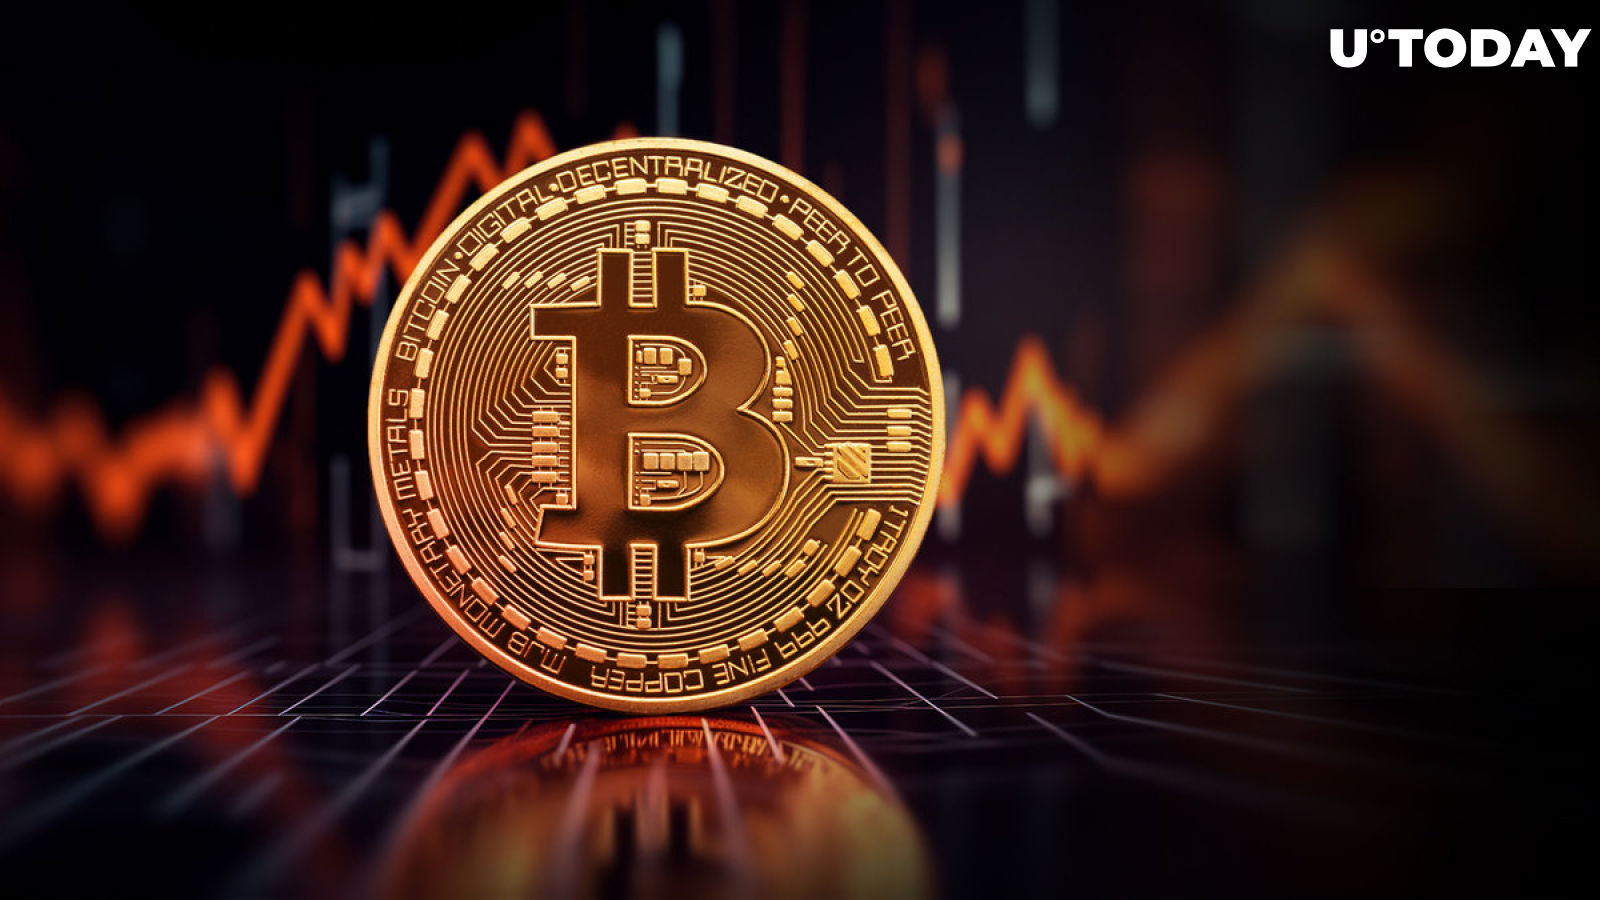 Bitcoin (BTC) Halving Might Bring Suffering in Short Term, Analyst Charles Edwards Says